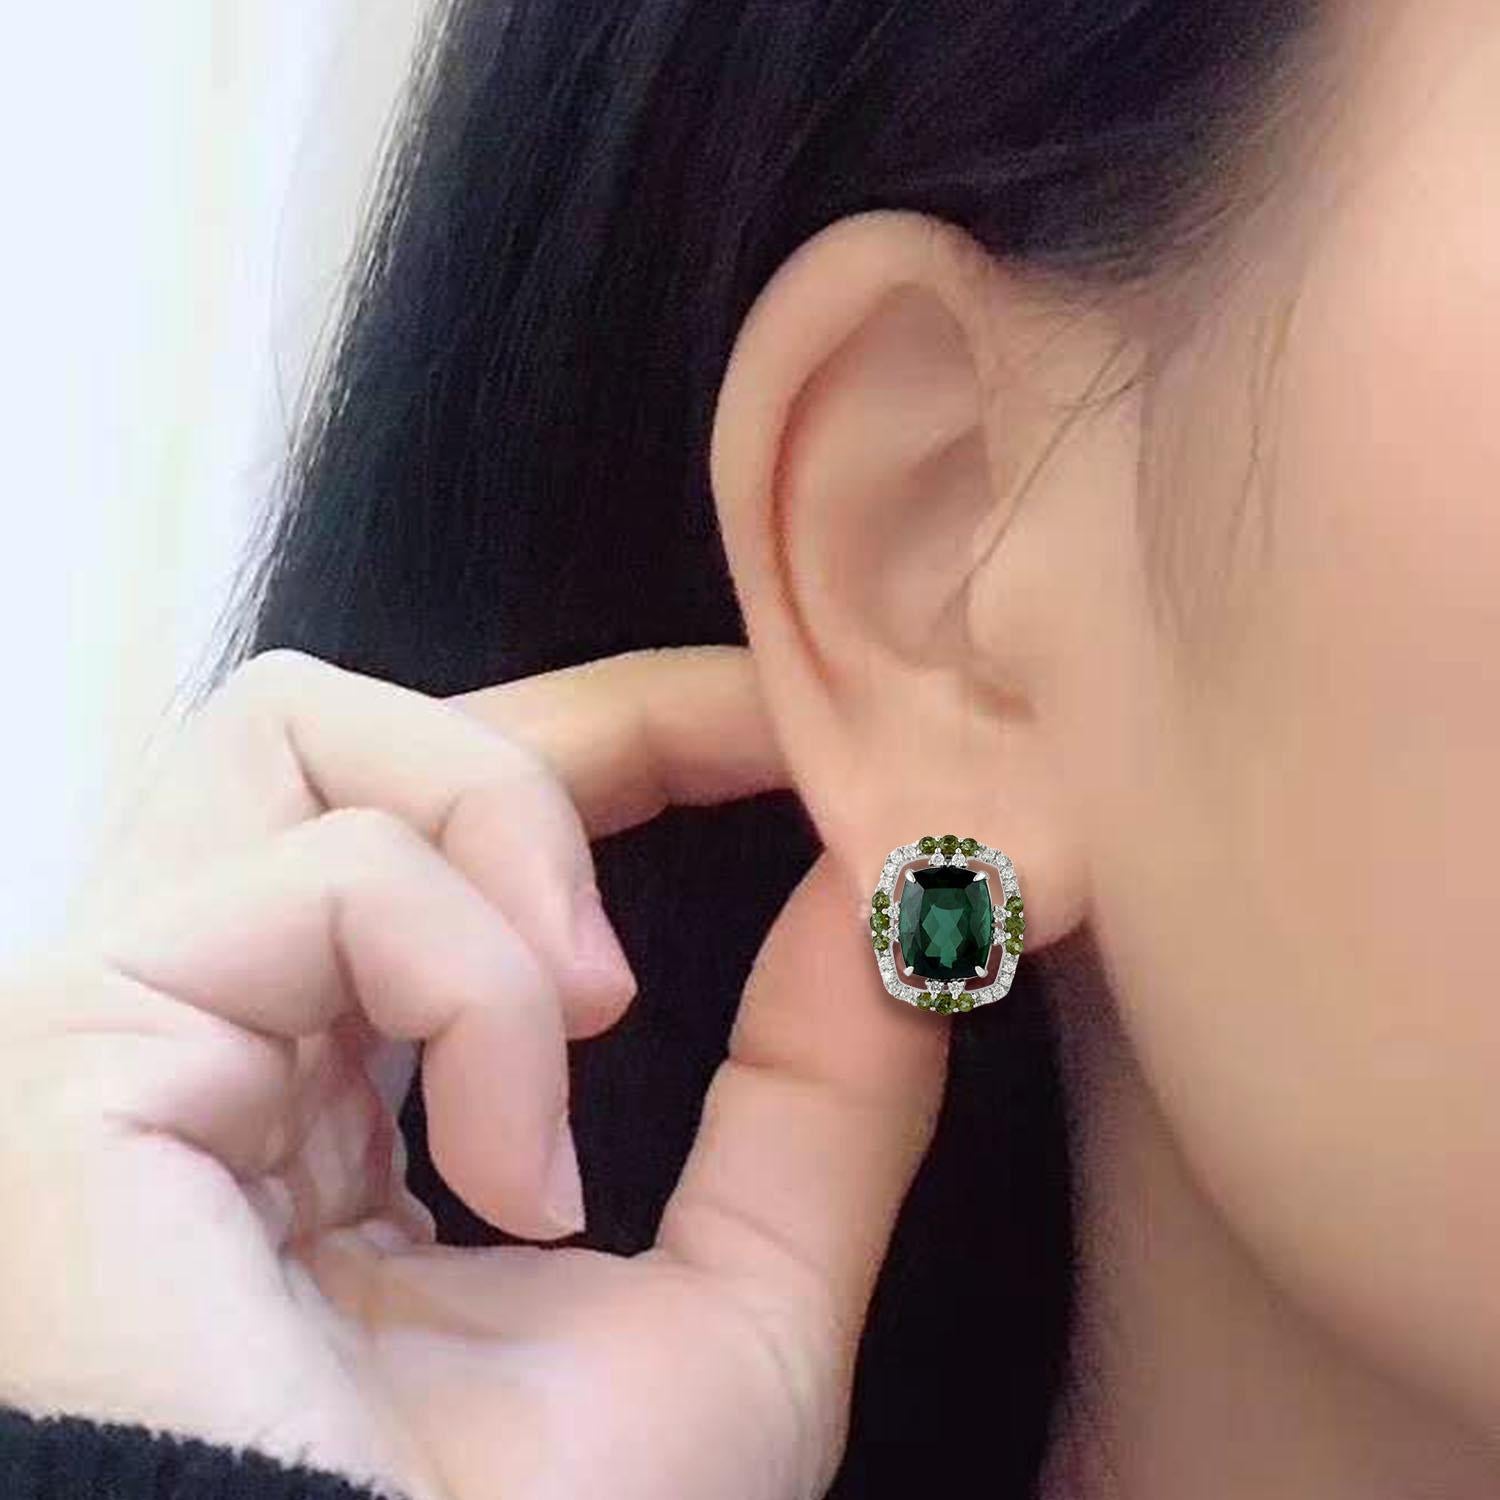 Cast from 18K gold, these beautiful stud earrings are hand set in 11.18 carats tourmaline, peridot and .41 carats of sparkling diamonds.

FOLLOW  MEGHNA JEWELS storefront to view the latest collection & exclusive pieces.  Meghna Jewels is proudly